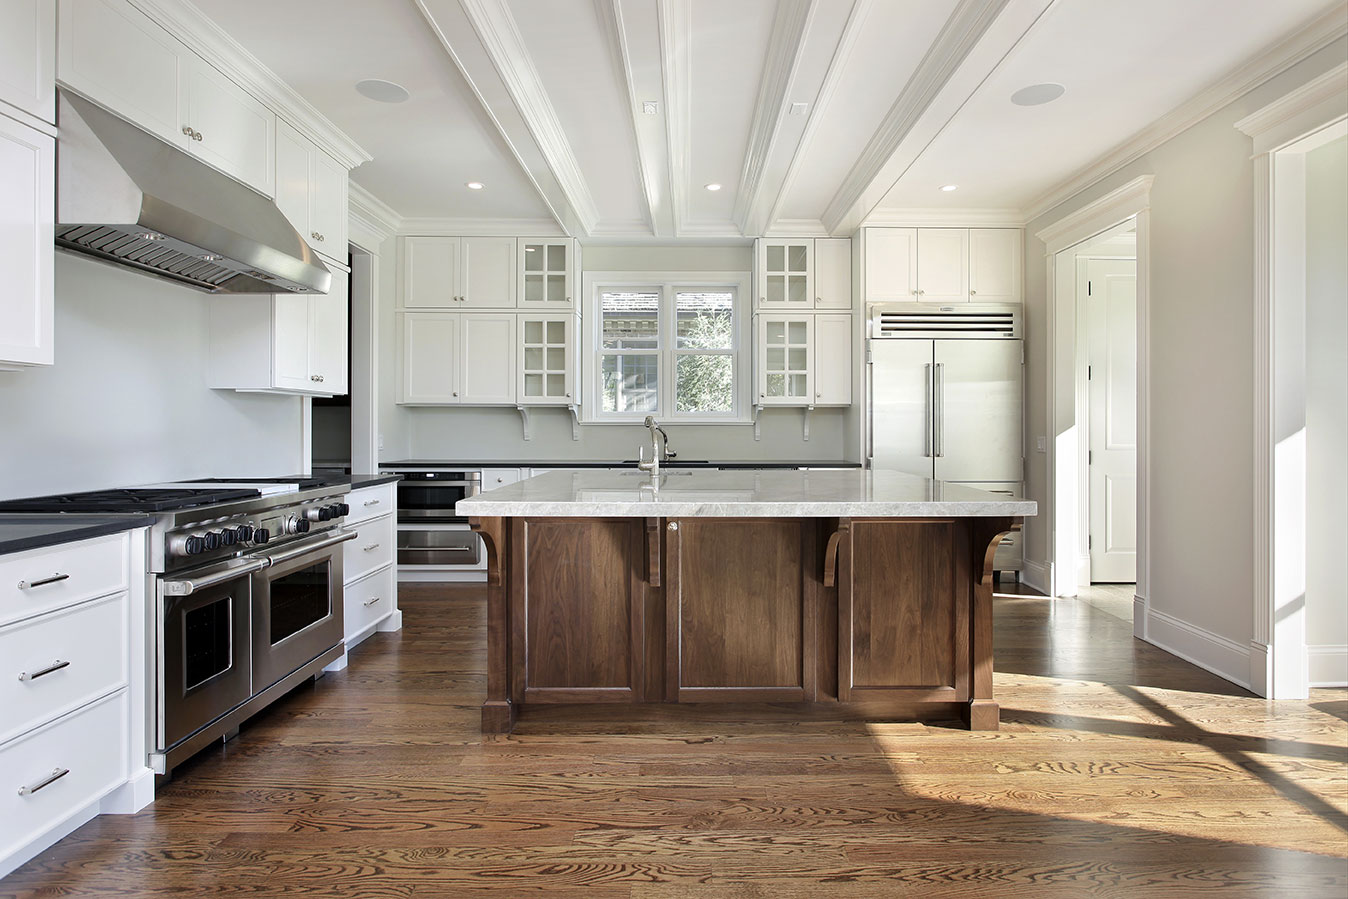 Custom Kitchen coutnertops mixed cabients - US sandy